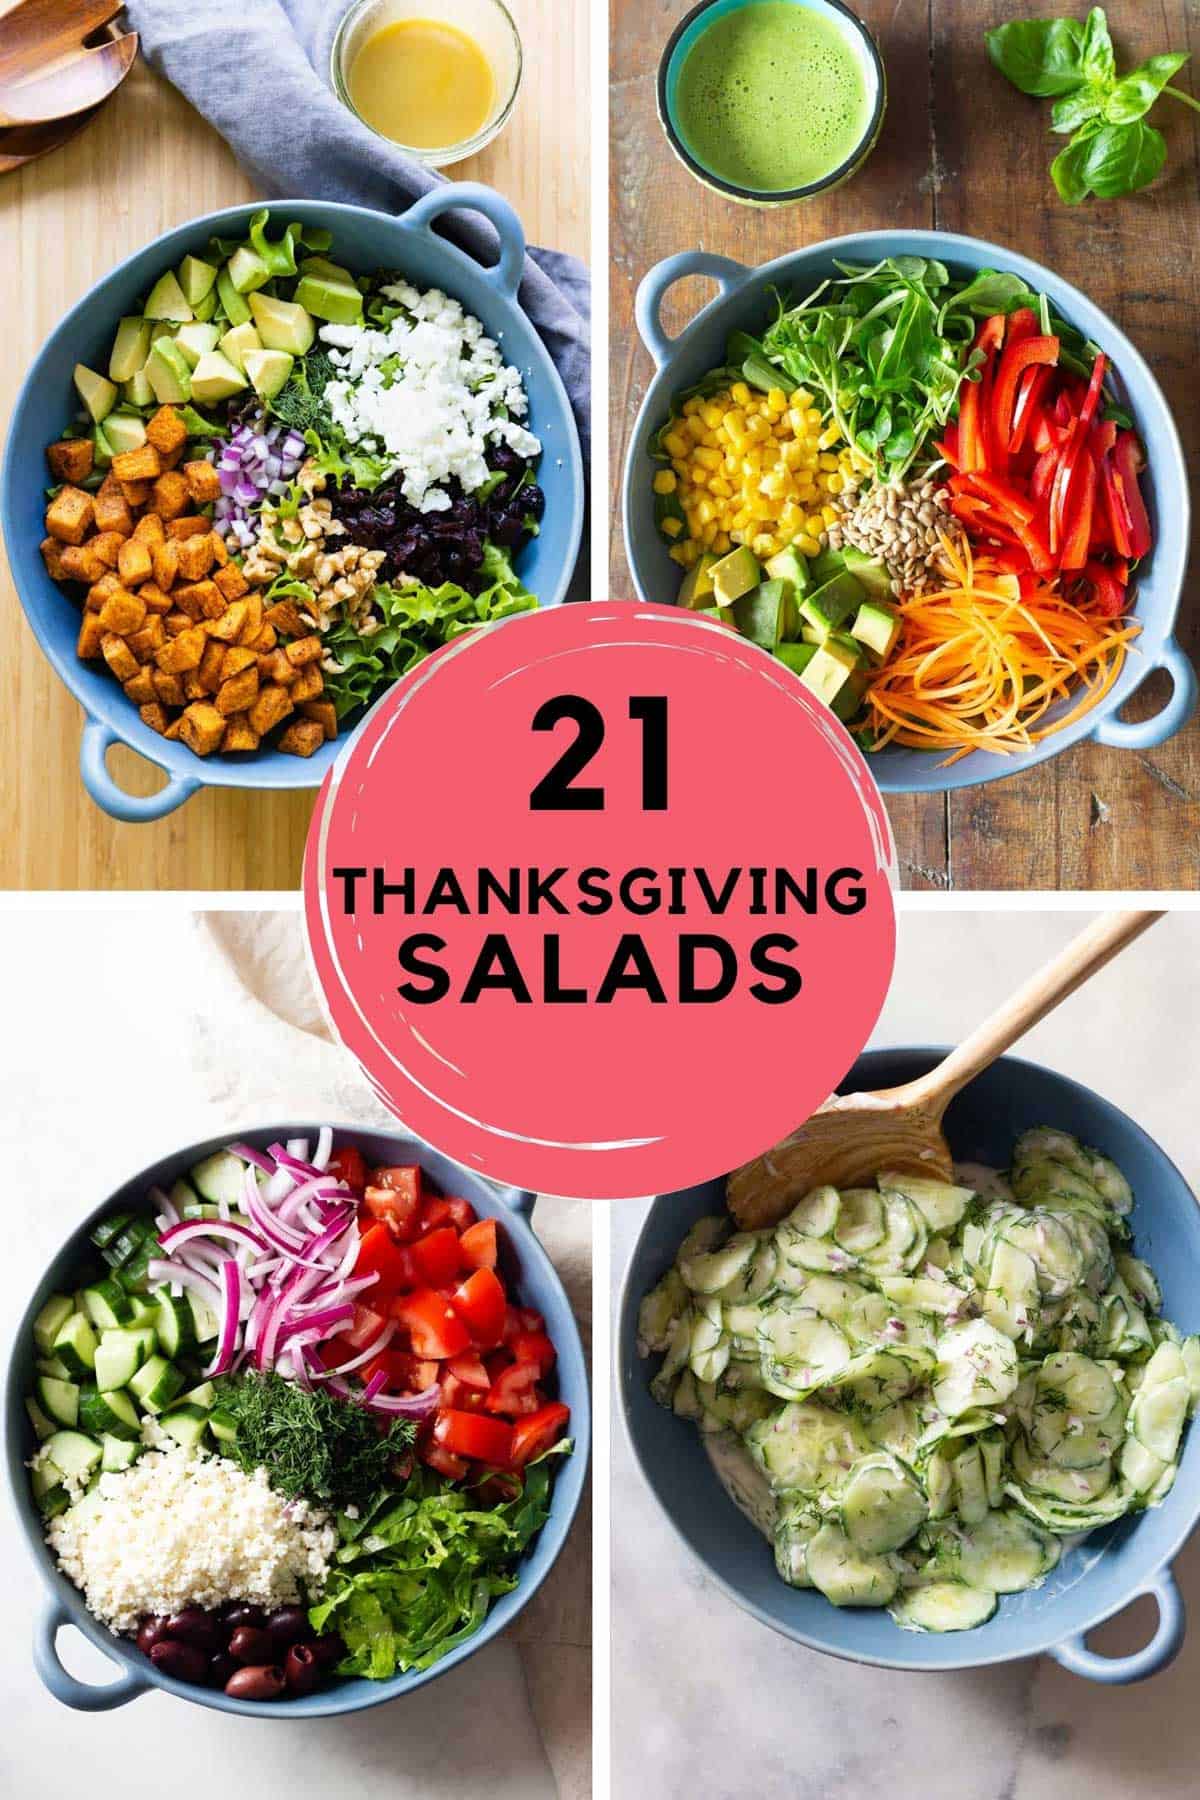 photo collage of 4 different salads and text overlay reading: "21 Thanksgiving Salads".